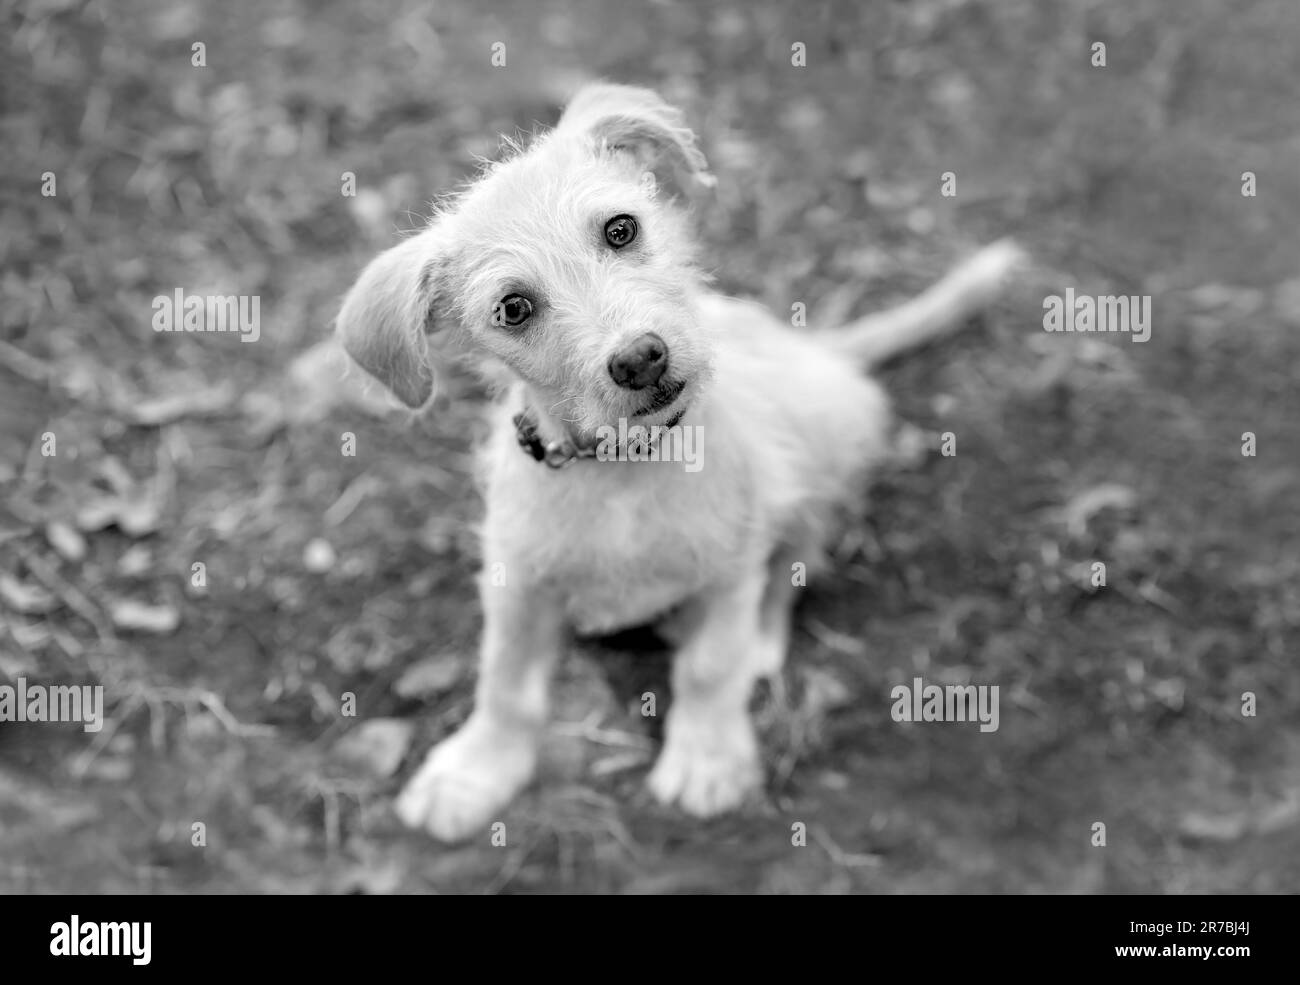 A Cute Puppy Dog Is Looking Up With A Confused Curious Look On His Face Black And White Stock Photo